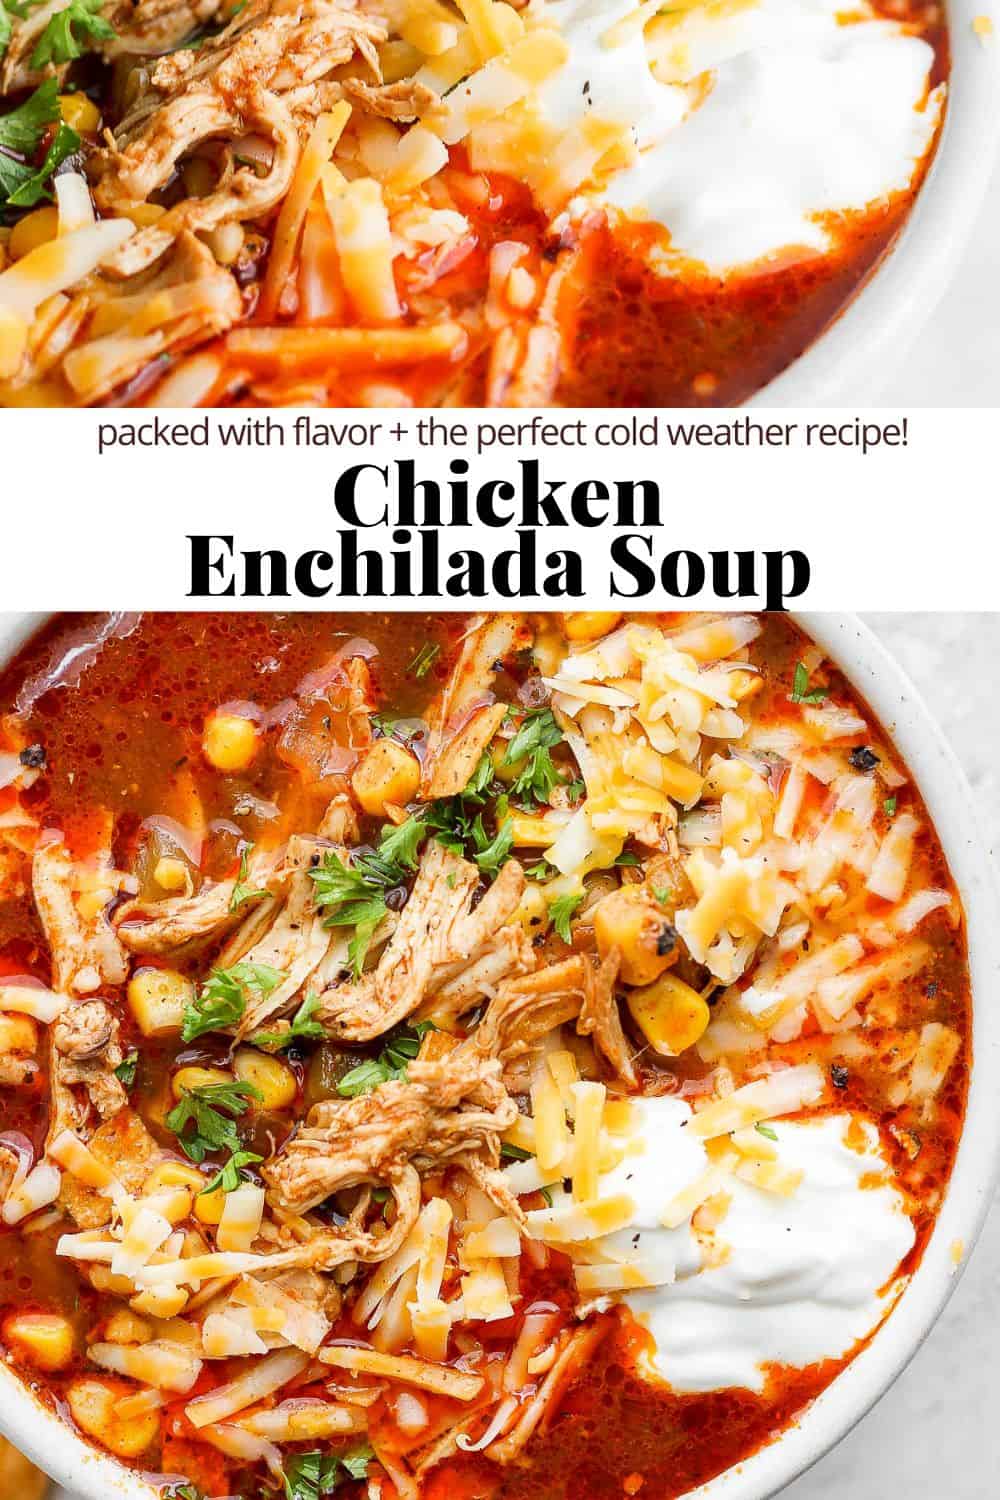 Pinterest image showing a portion of a bowl of chicken enchilada soup, the recipe title, and another wider shot of the chicken enchilada soup in a white bowl.